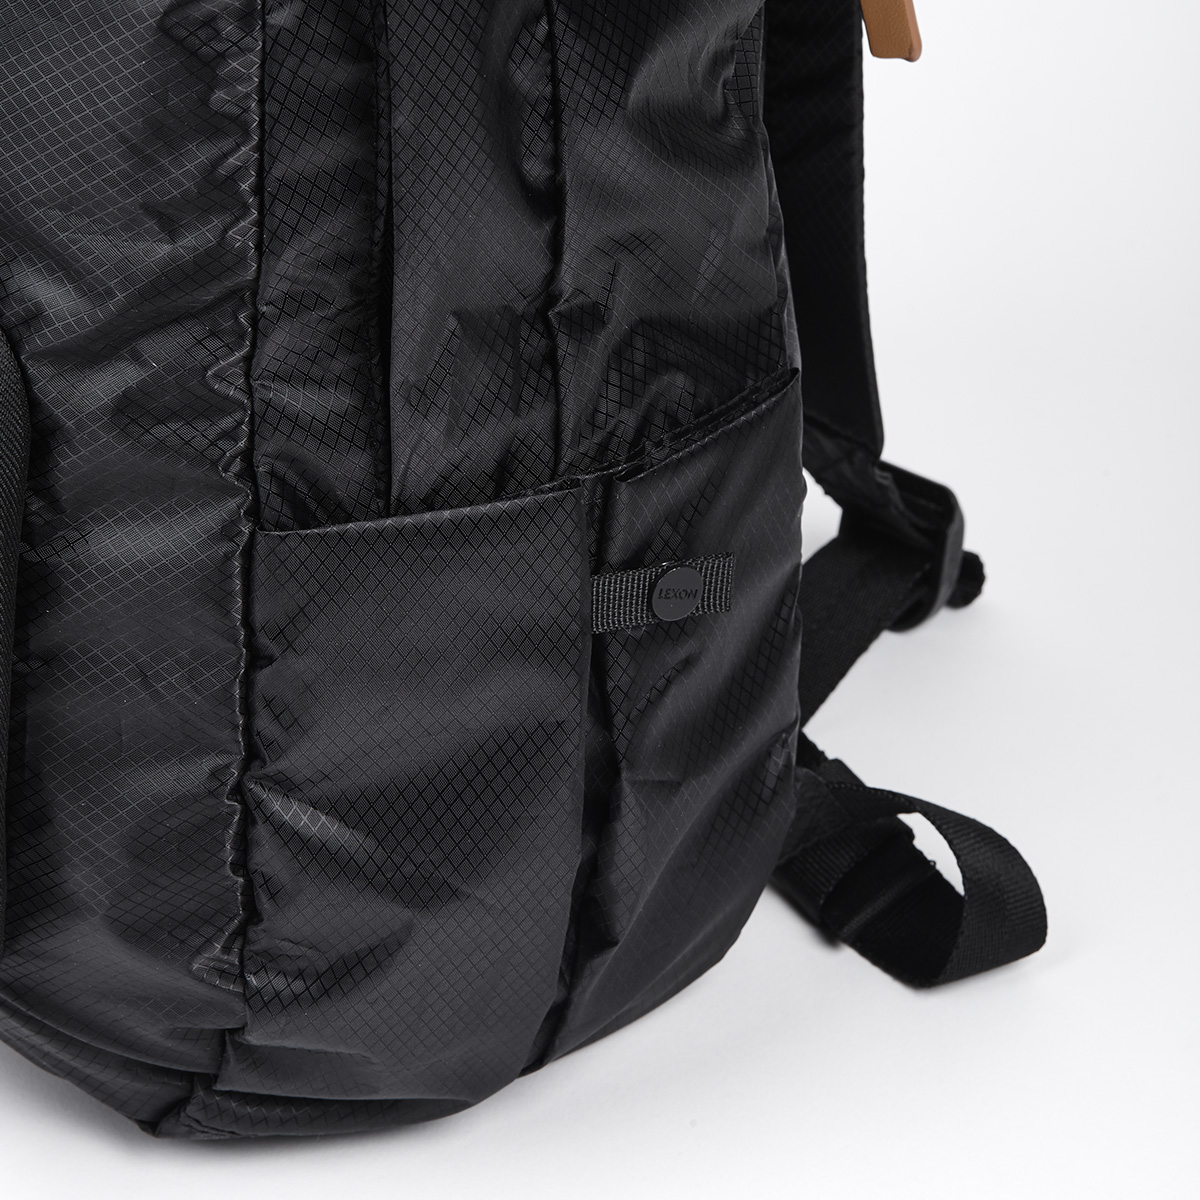 Packable Backpack LN2311